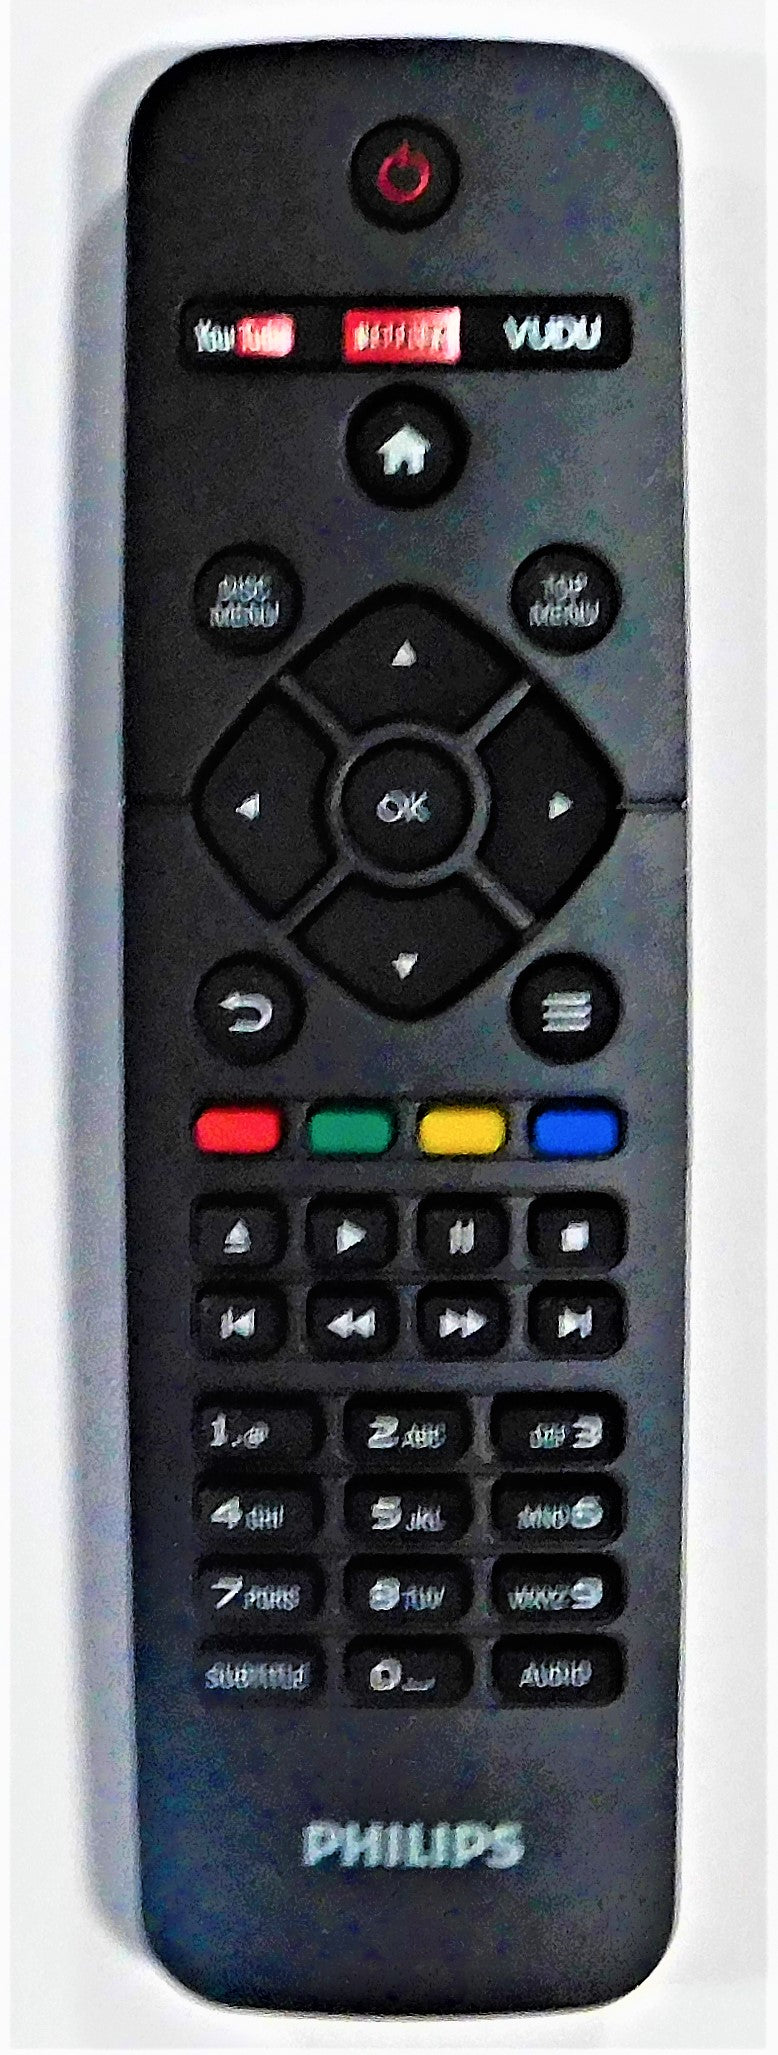 Original OEM replacement remote control for Philips Blu-ray players 996580006255